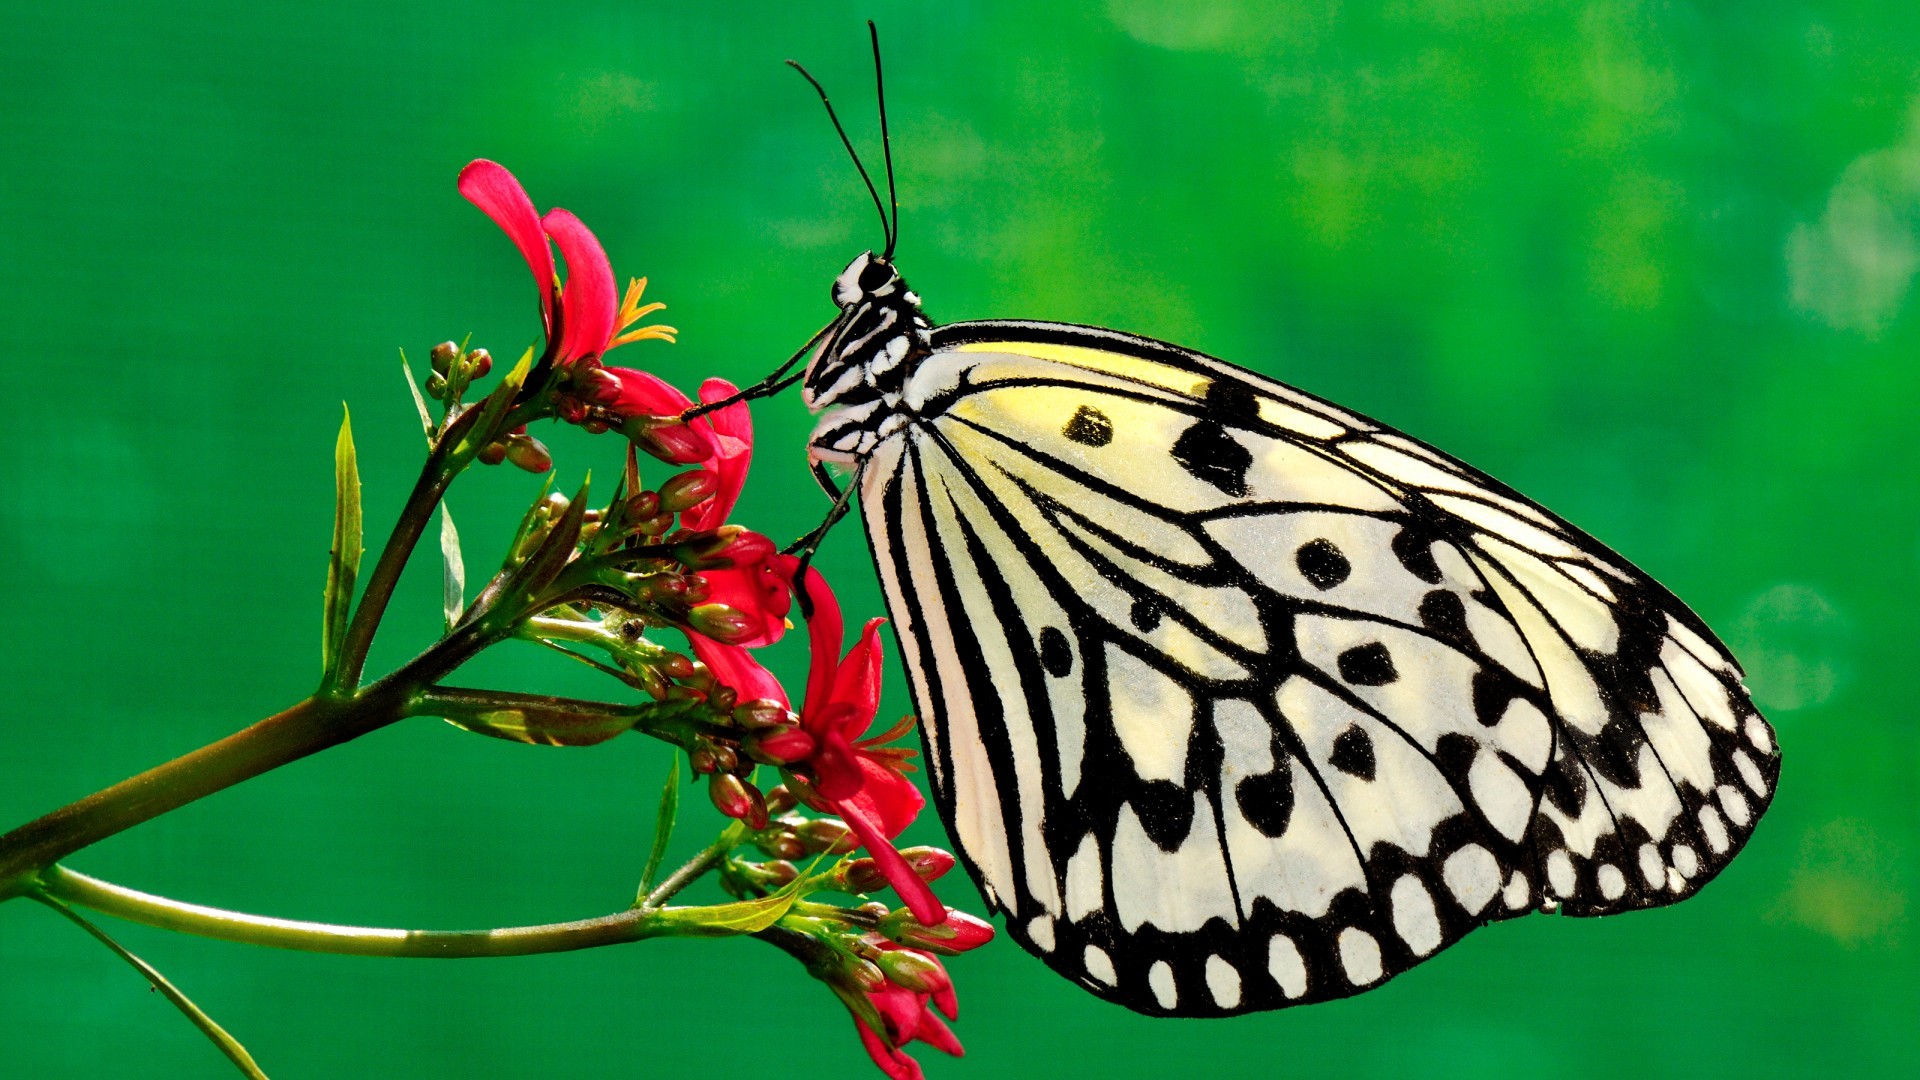 General 1920x1080 butterfly insect flowers animals green background